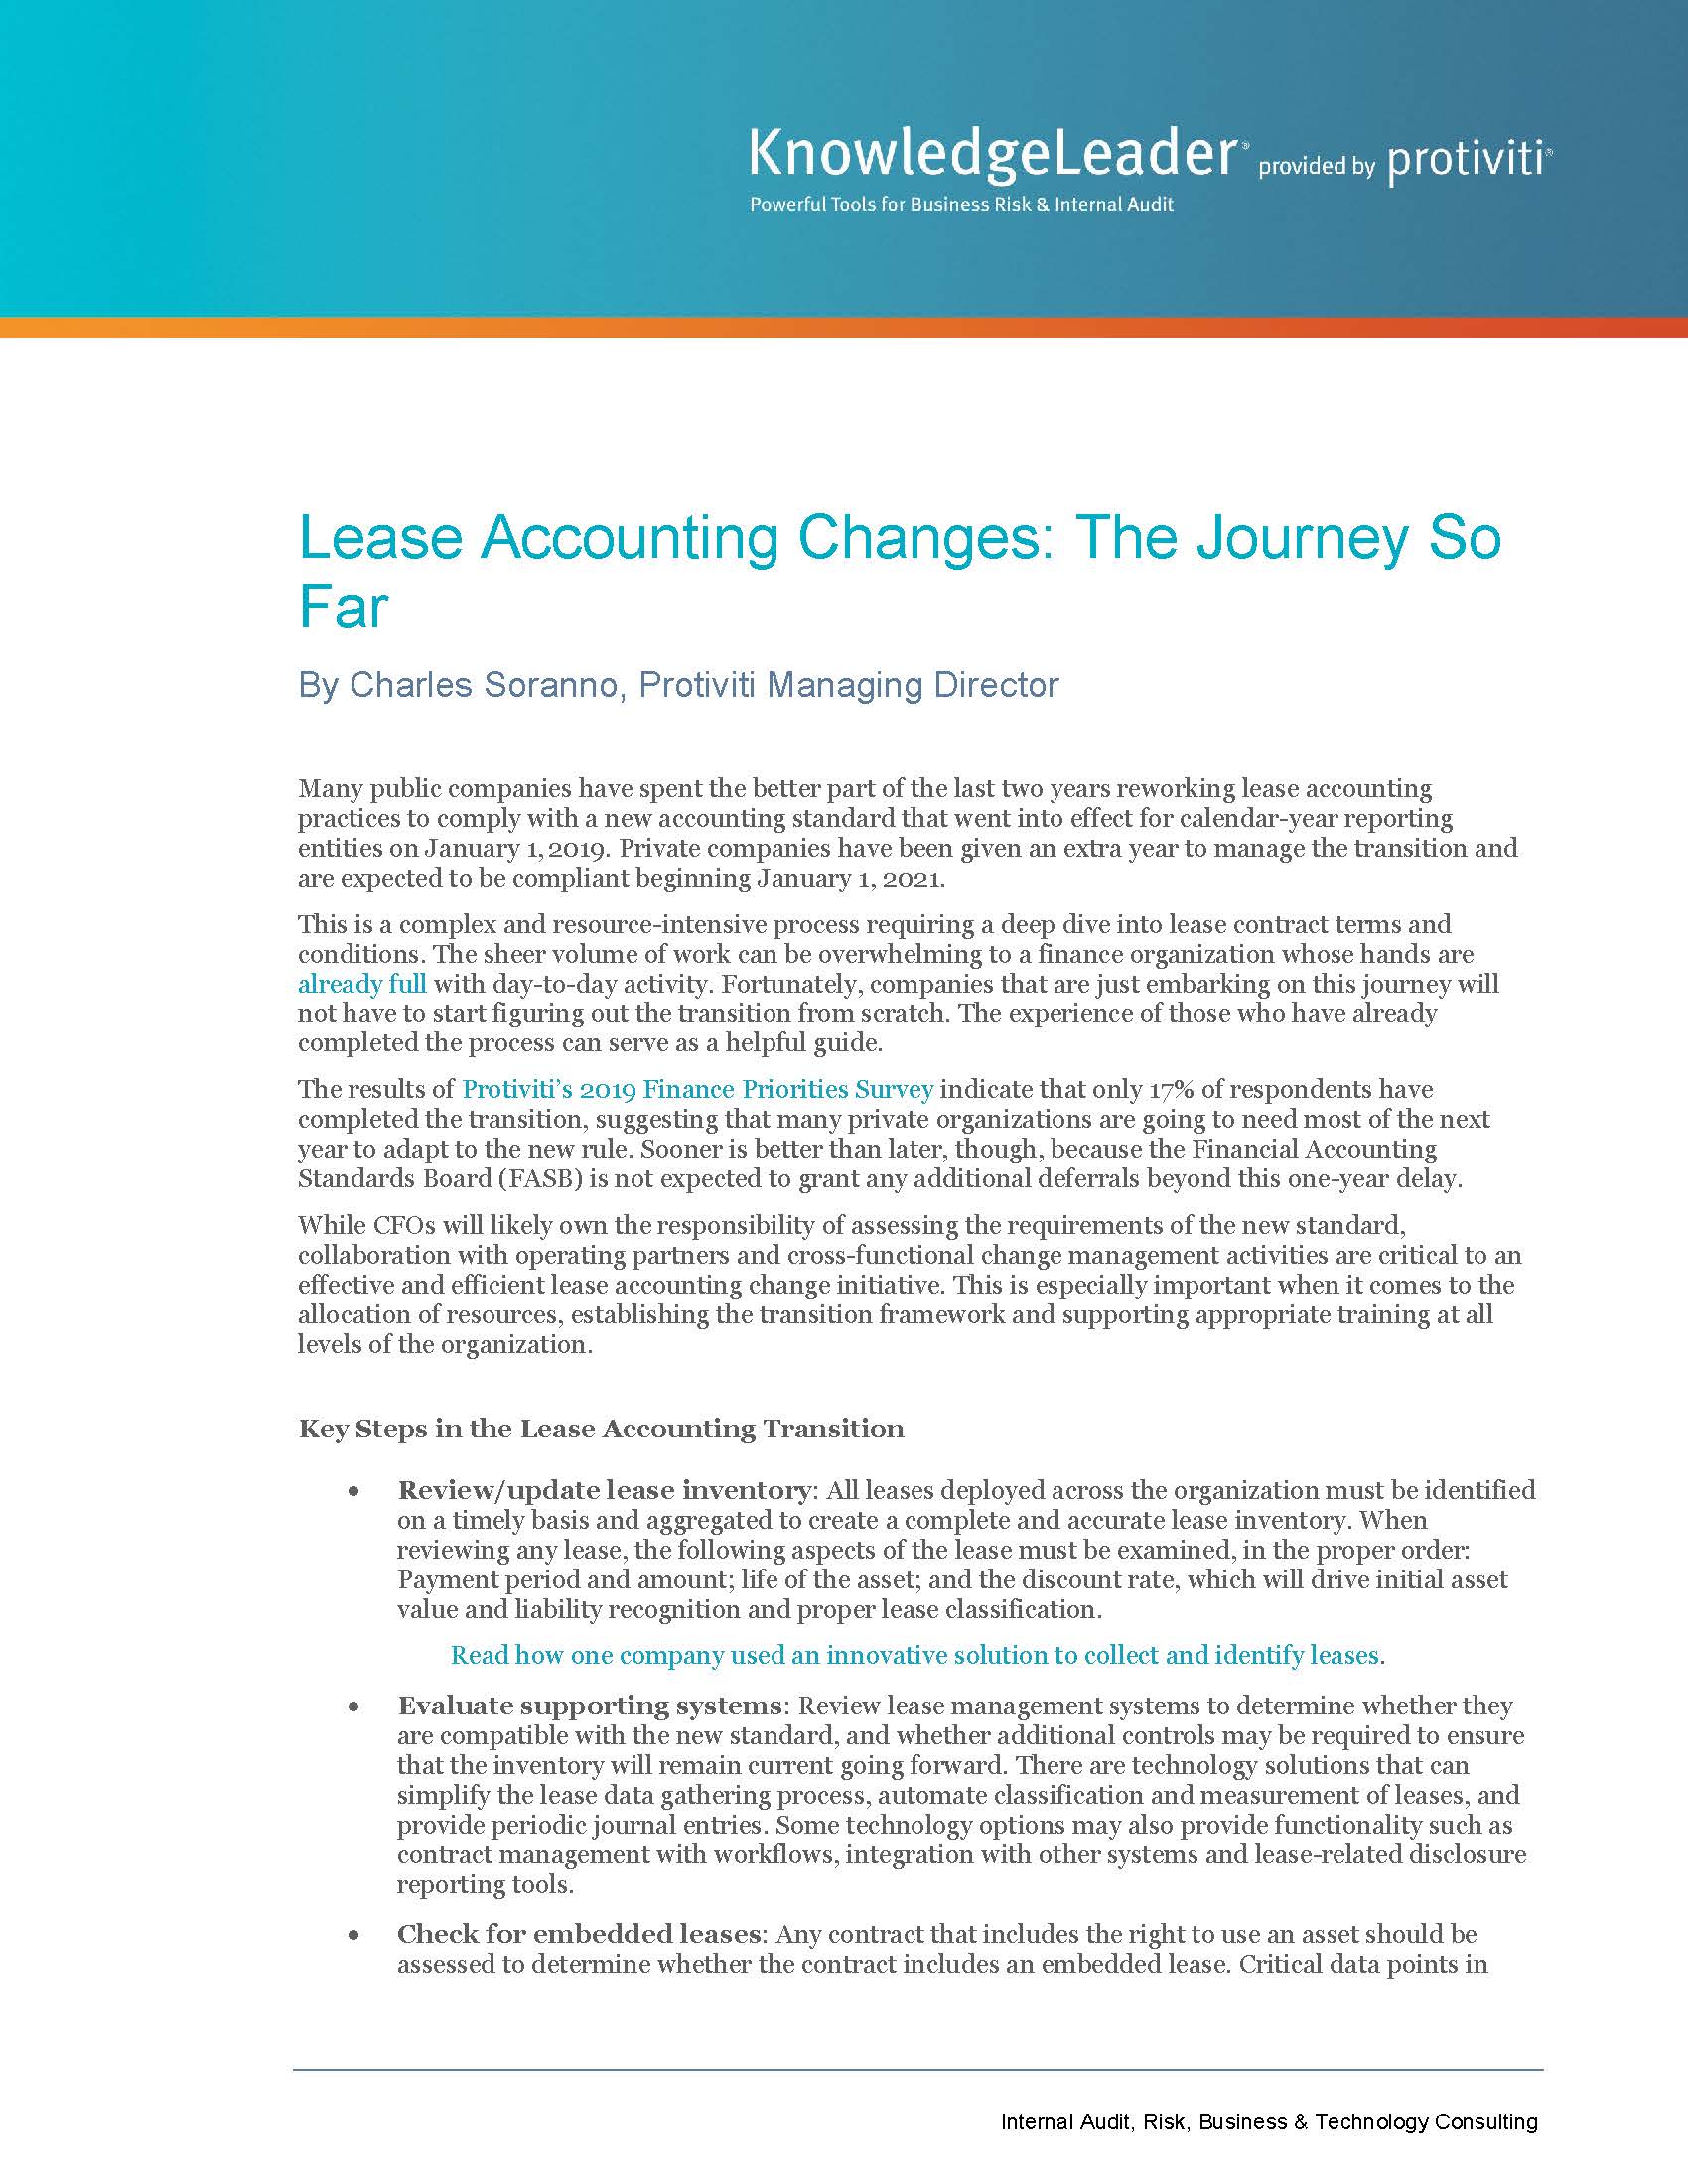 Screenshot of the first page of Lease Accounting Changes The Journey So Far